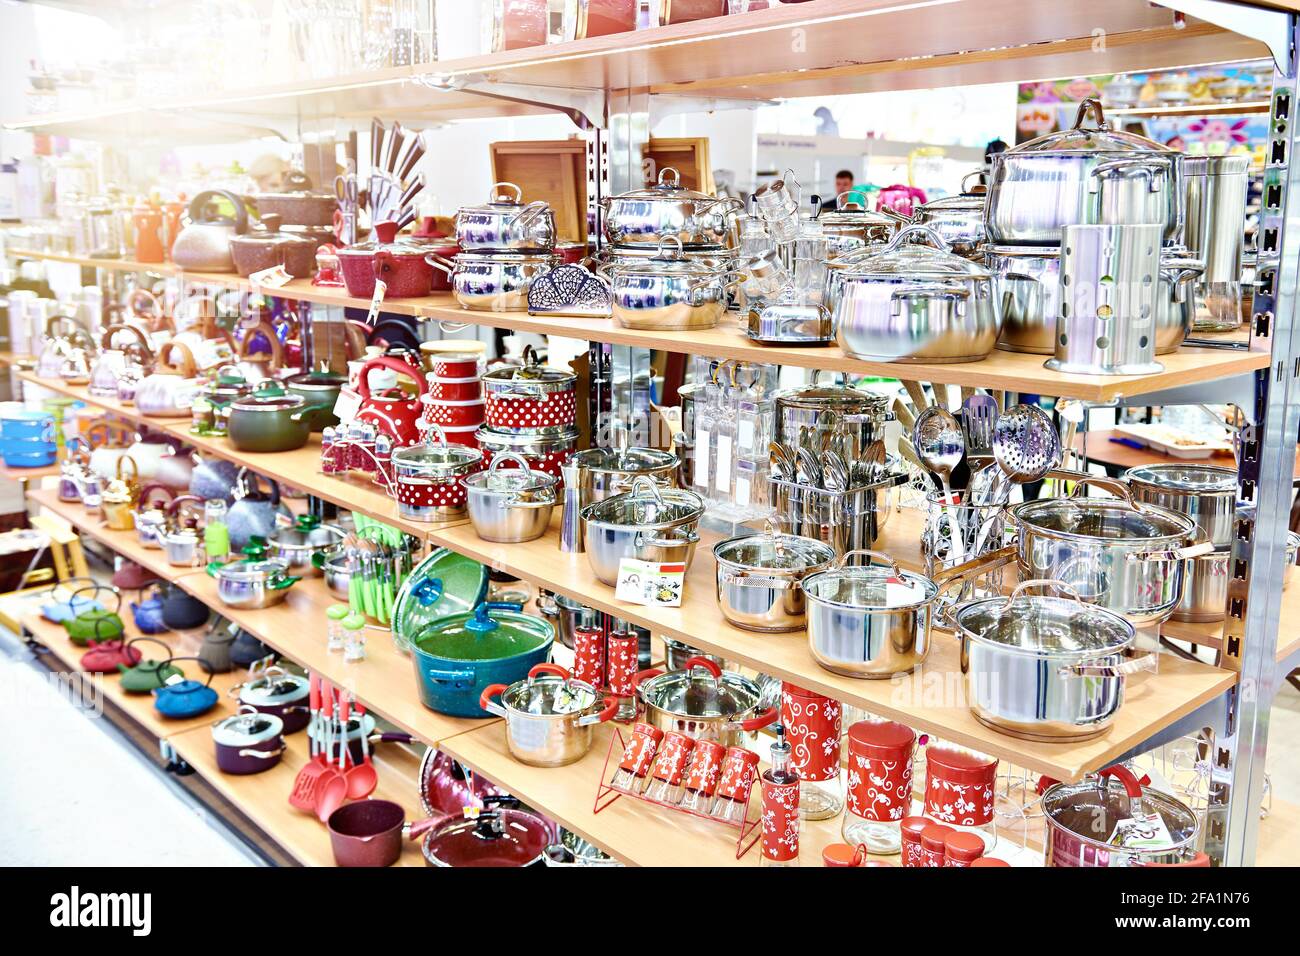 Kitchenware in the household goods store Stock Photo   Alamy